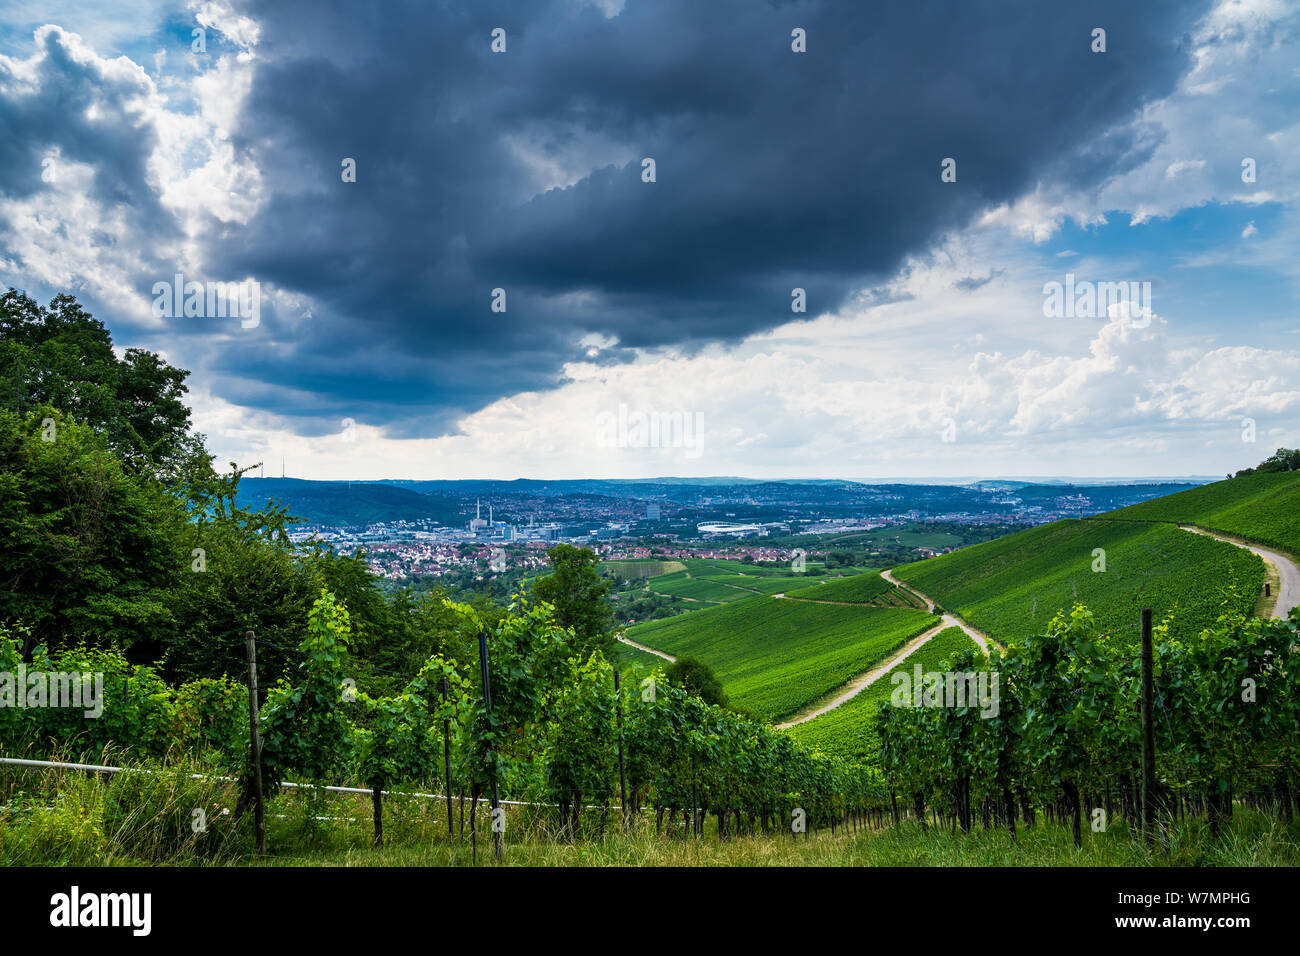 Germany, Dangerous thundery clouds over city of stuttgart behind green vineyard nature landscape from kappelberg mountain in summer Stock Photo